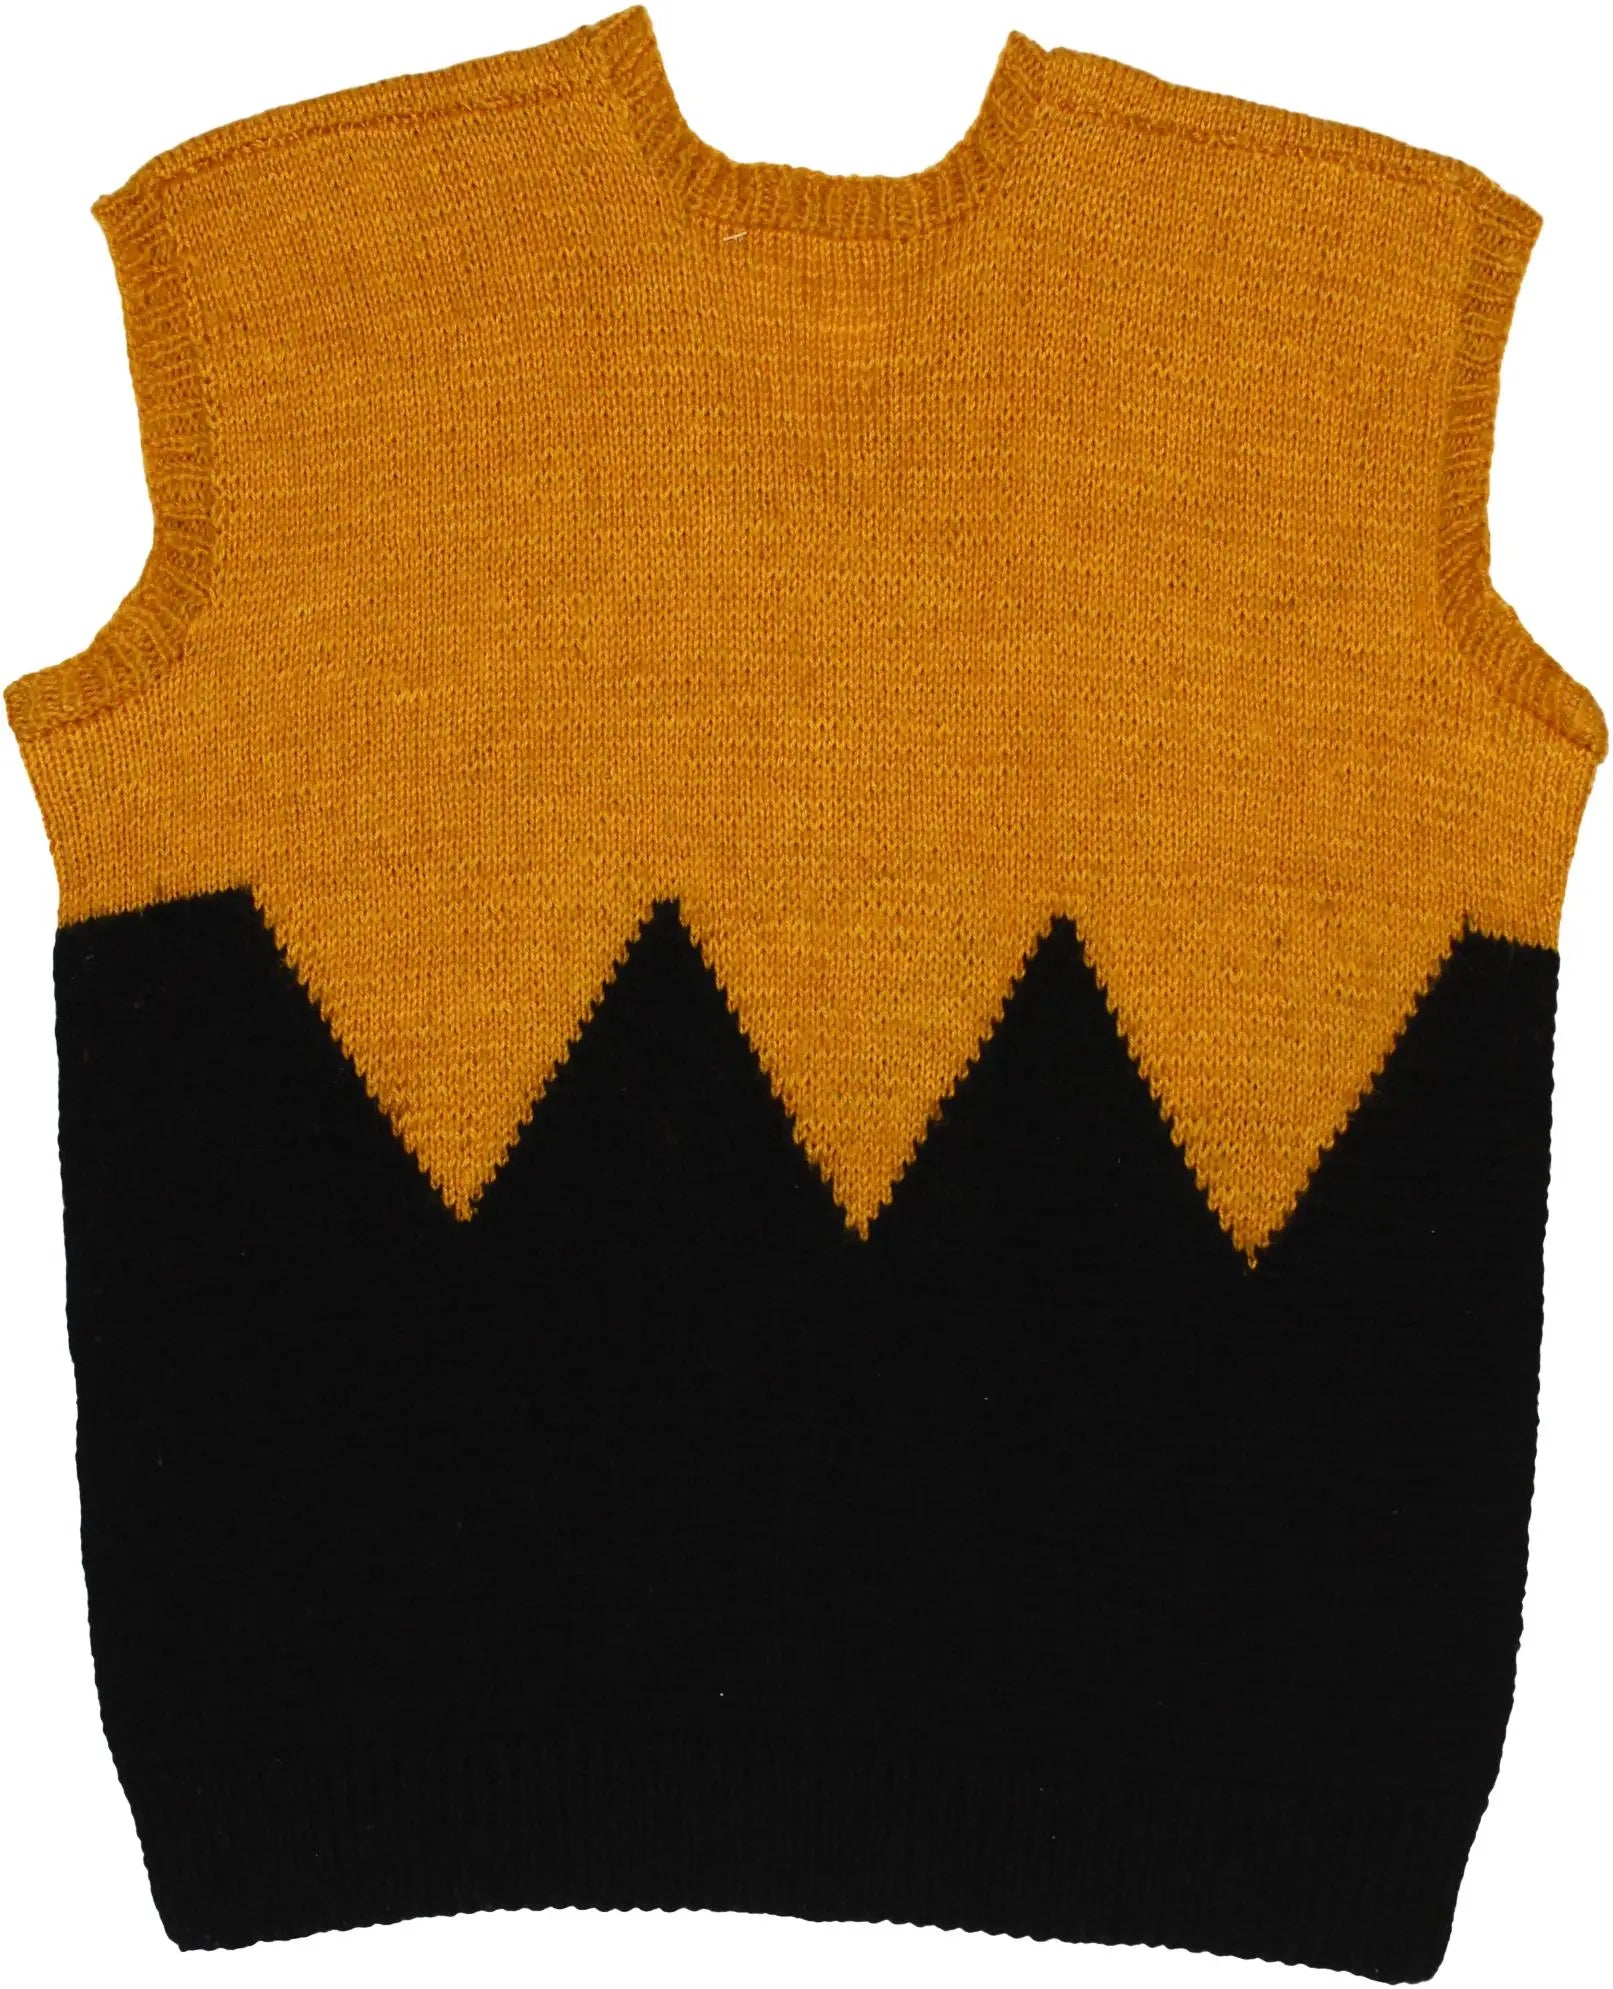 Handmade - Handknitted Vest- ThriftTale.com - Vintage and second handclothing